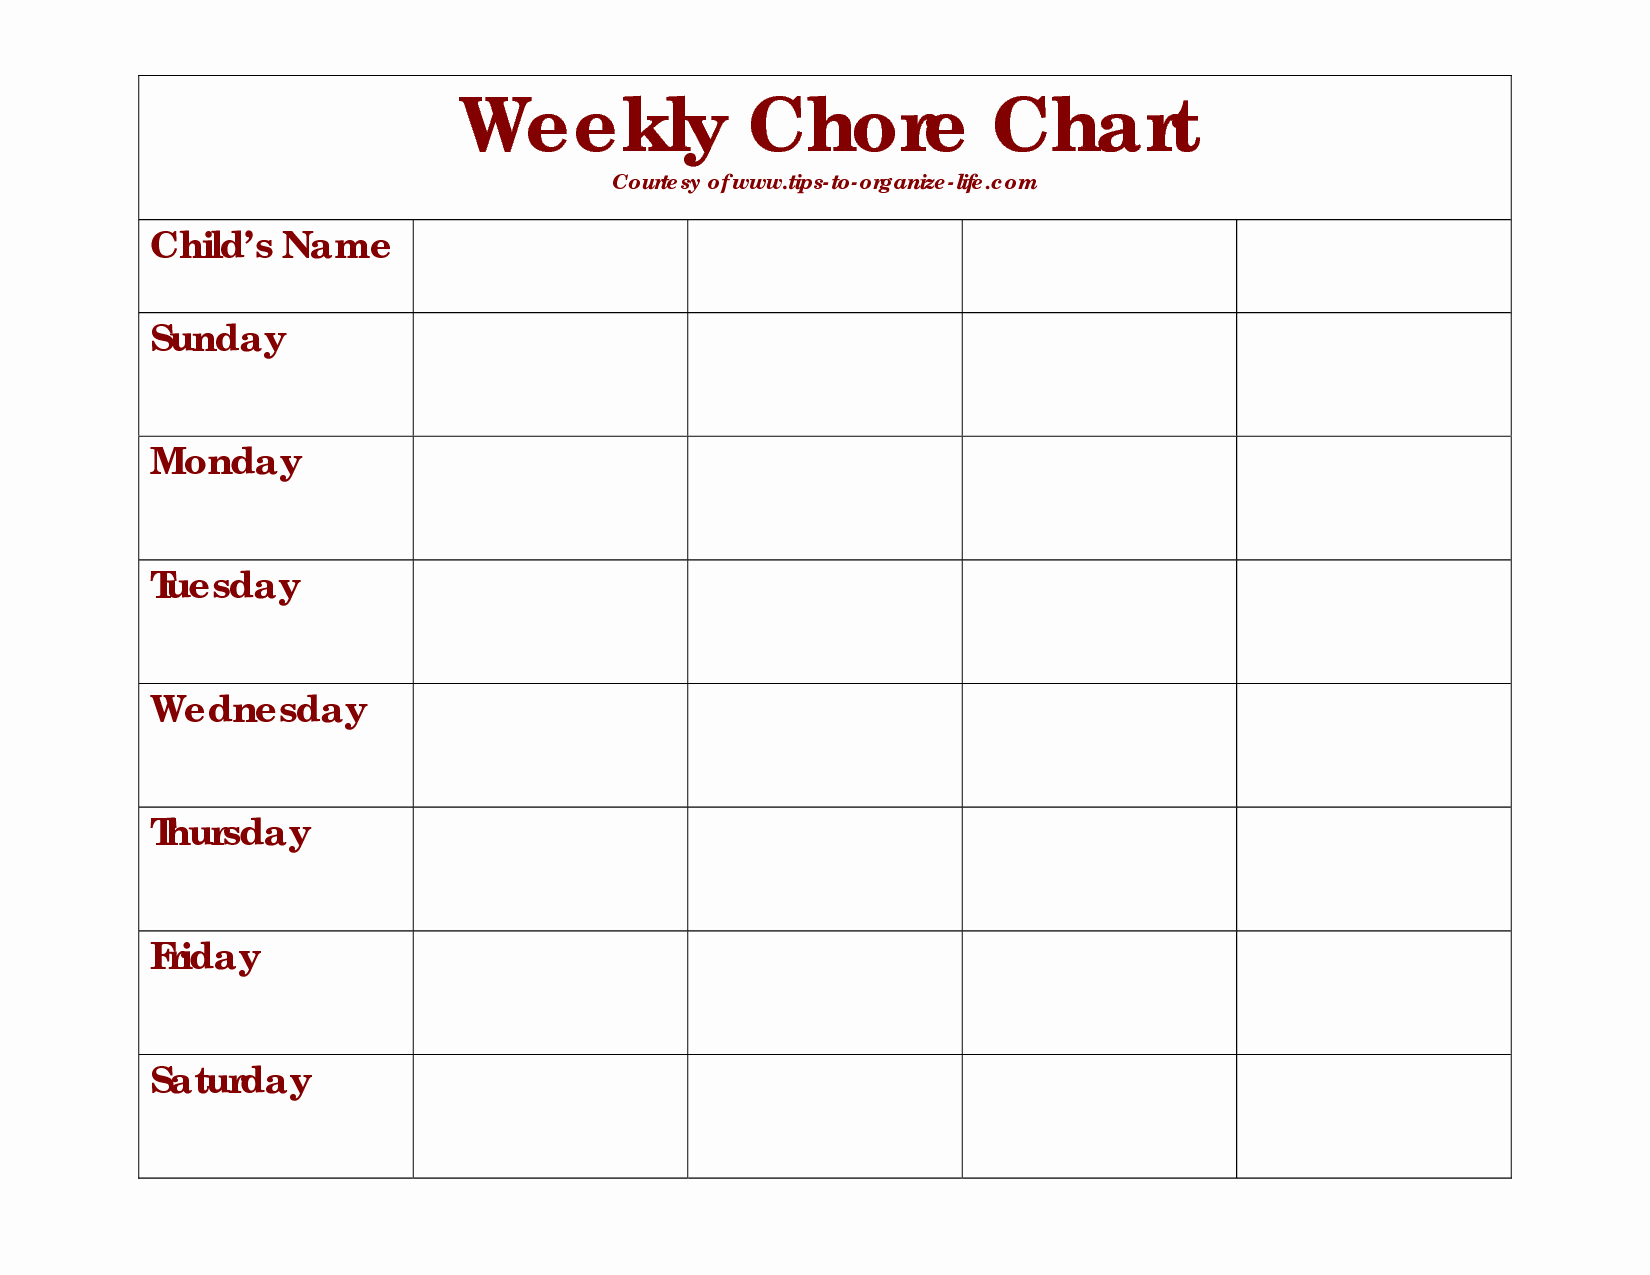 Weekly Chore Chart Template Lovely Weekly Chore Chart